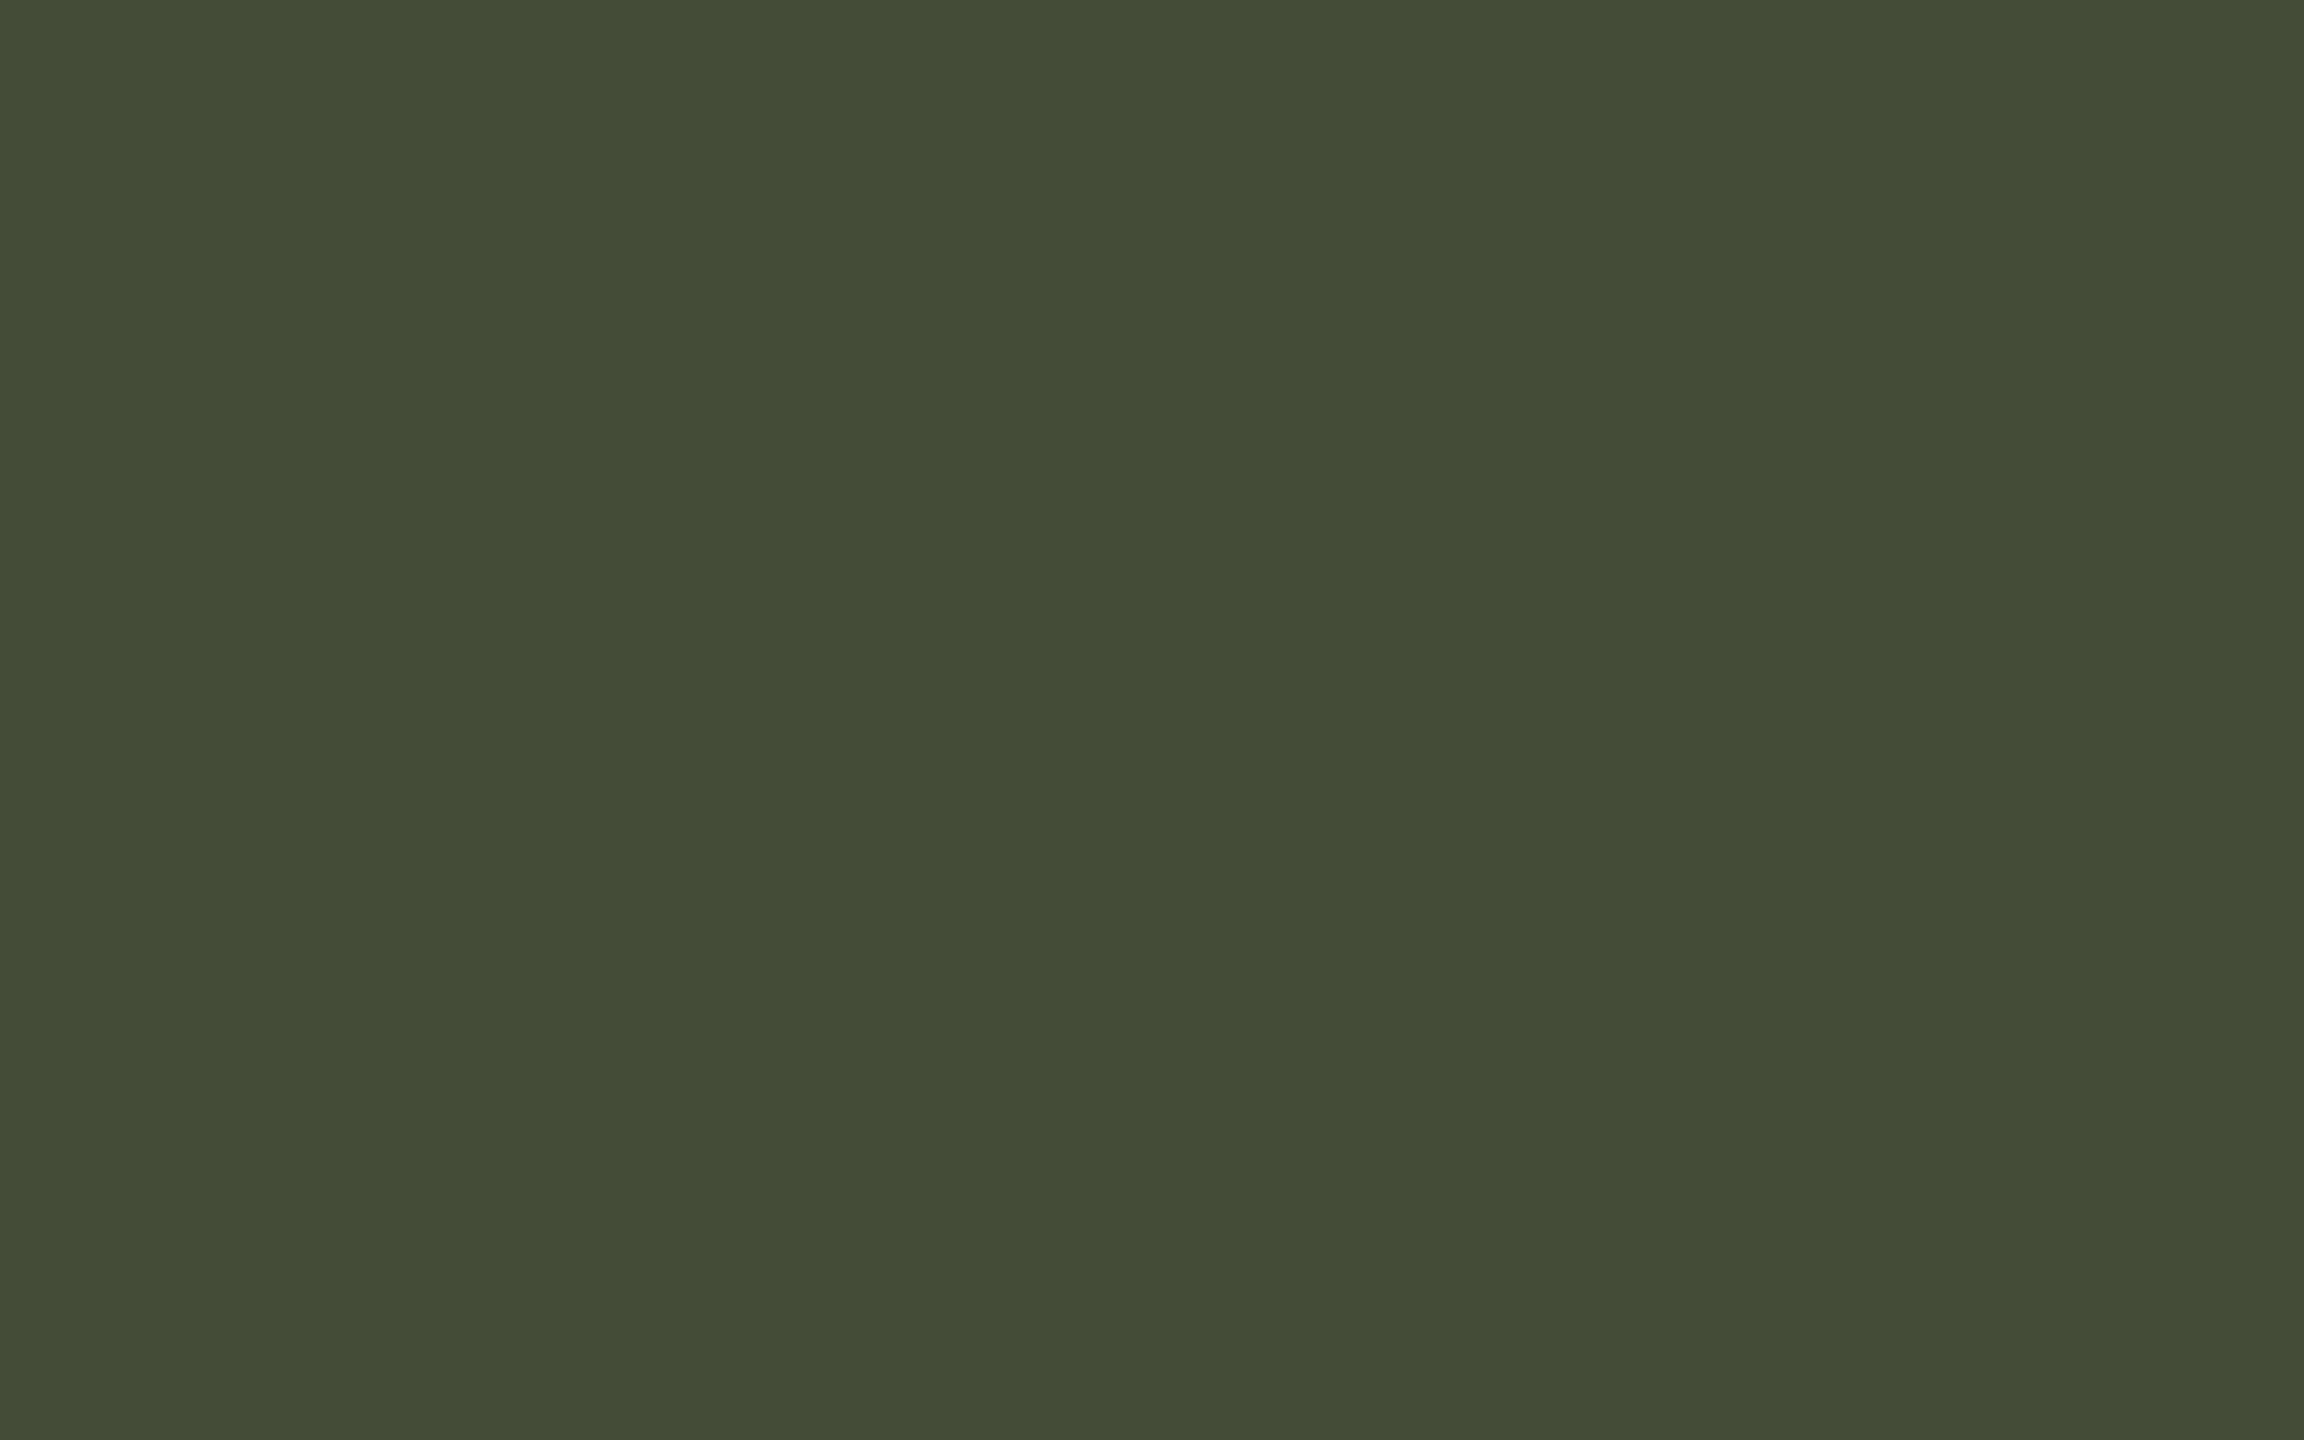 2304x1440 Rifle Green Solid Color Background